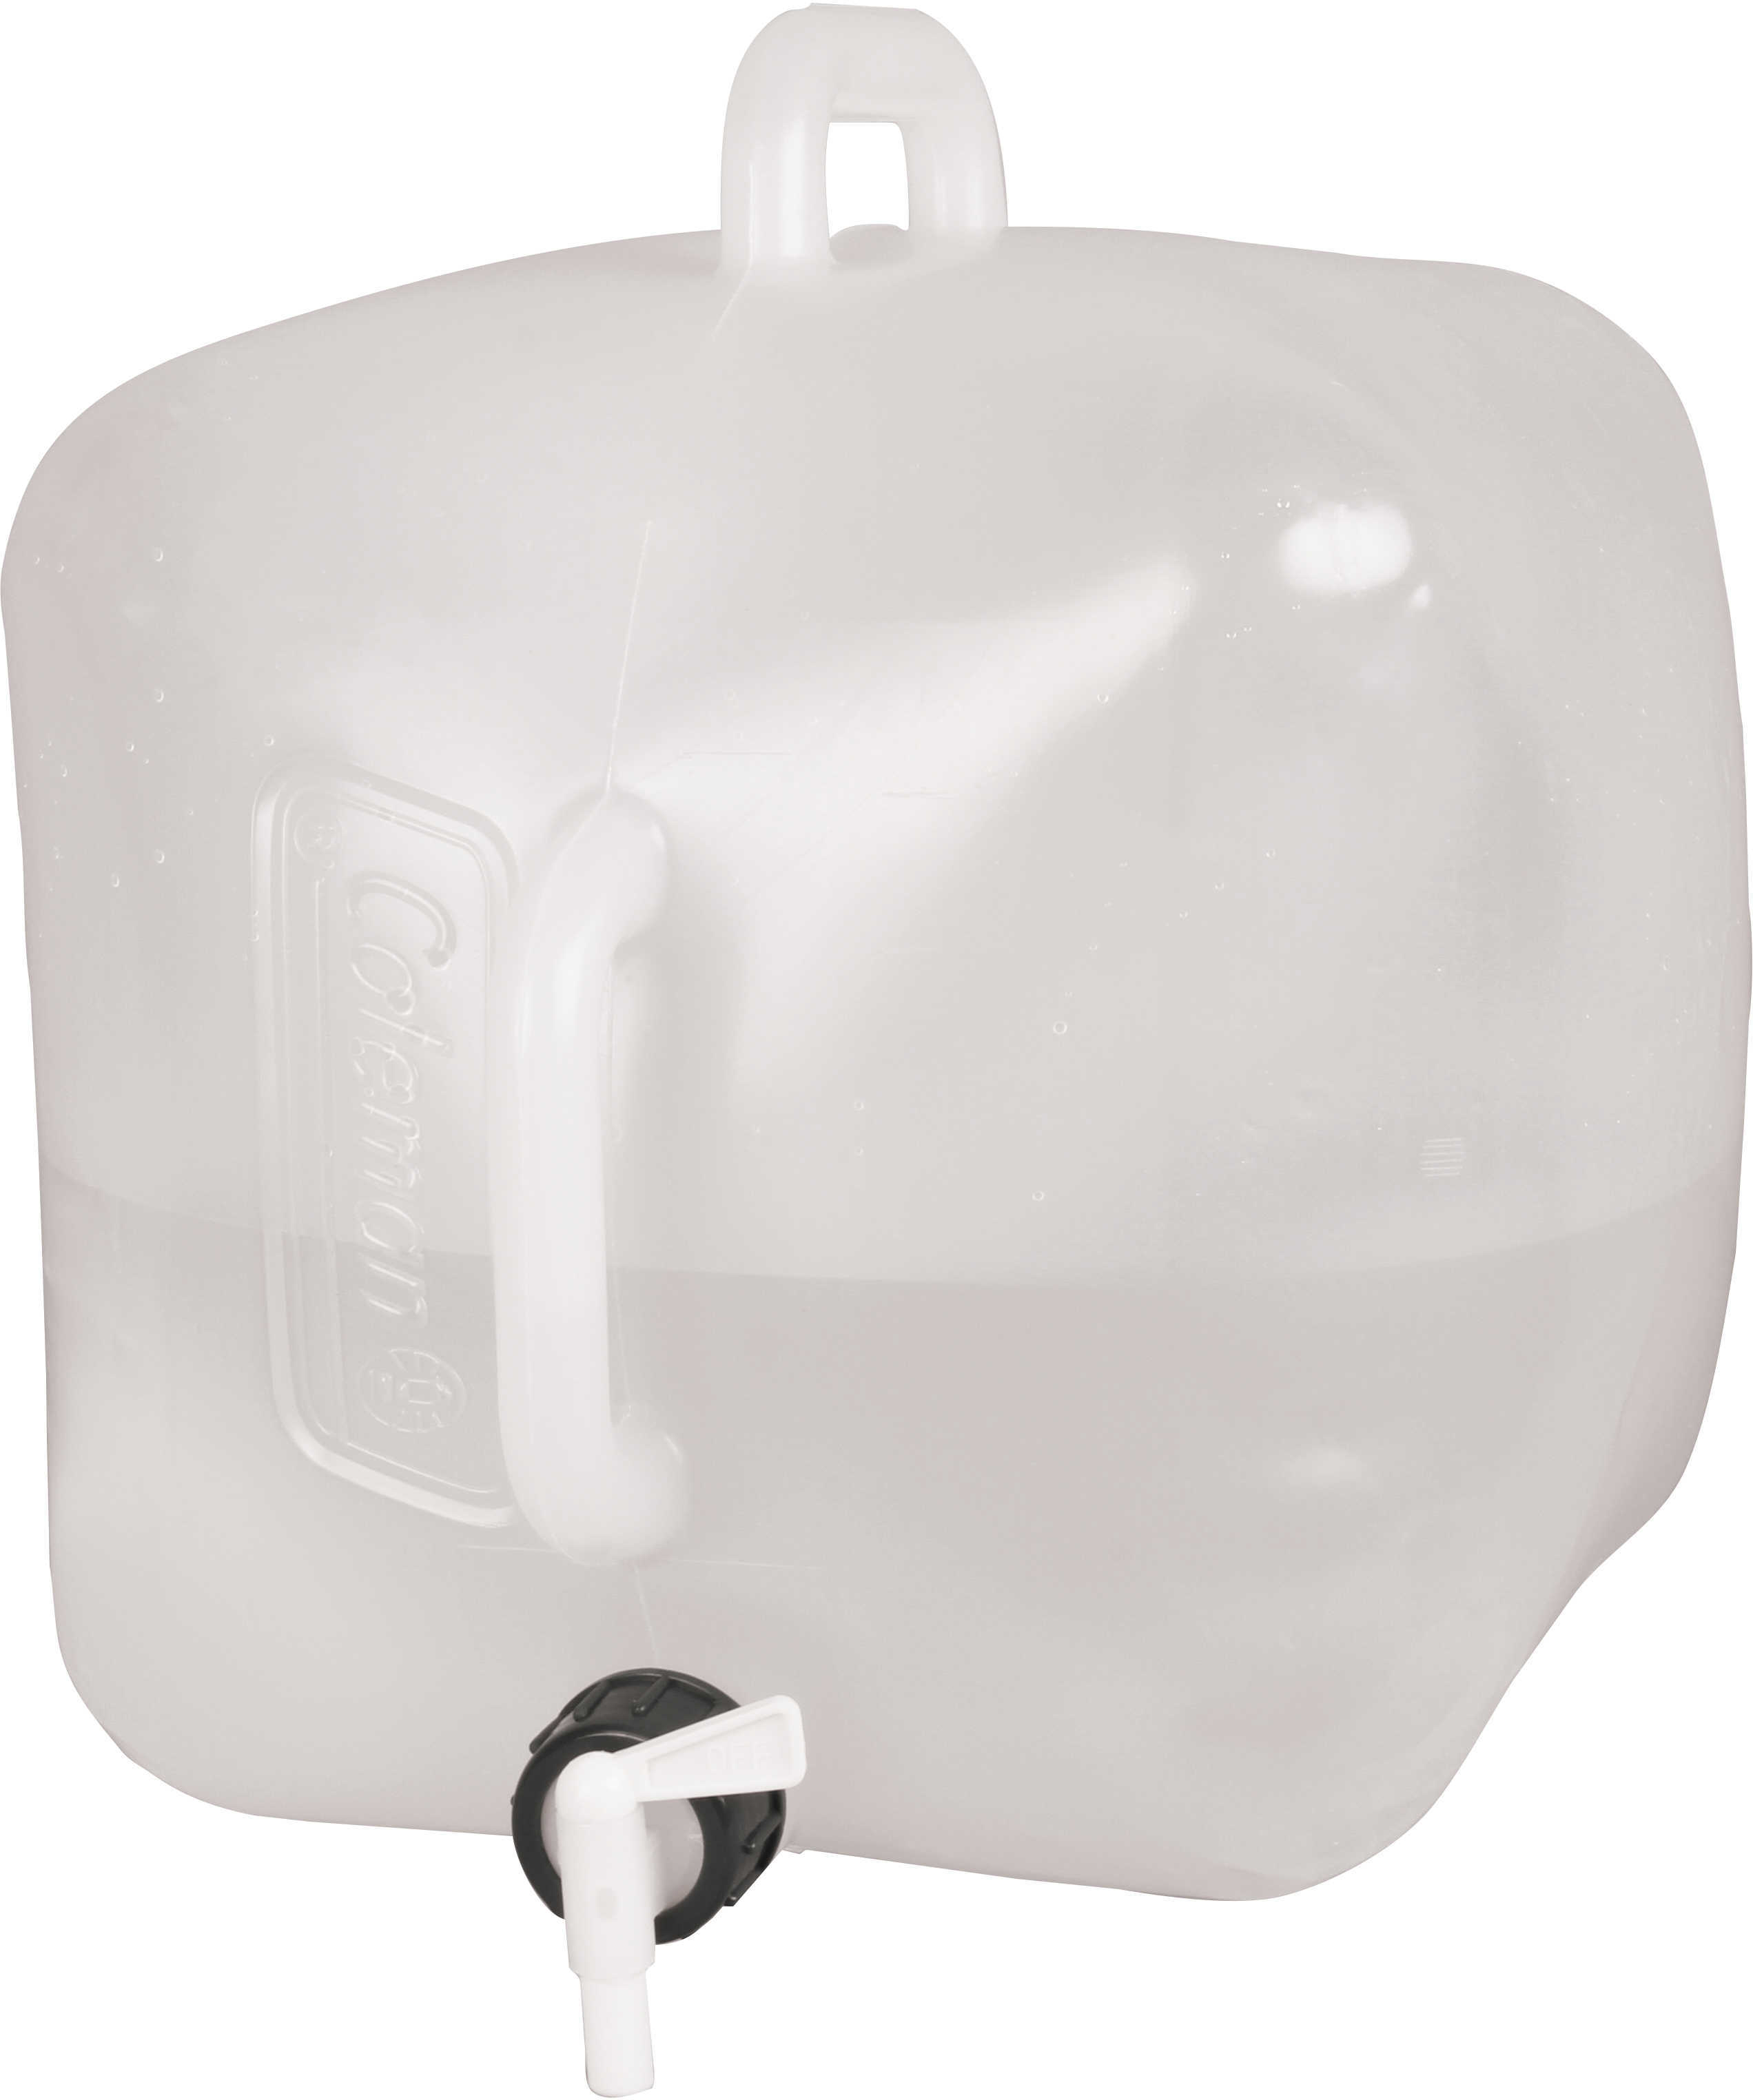 Coleman Water Carrier 5 Gallon Md: 2000014870